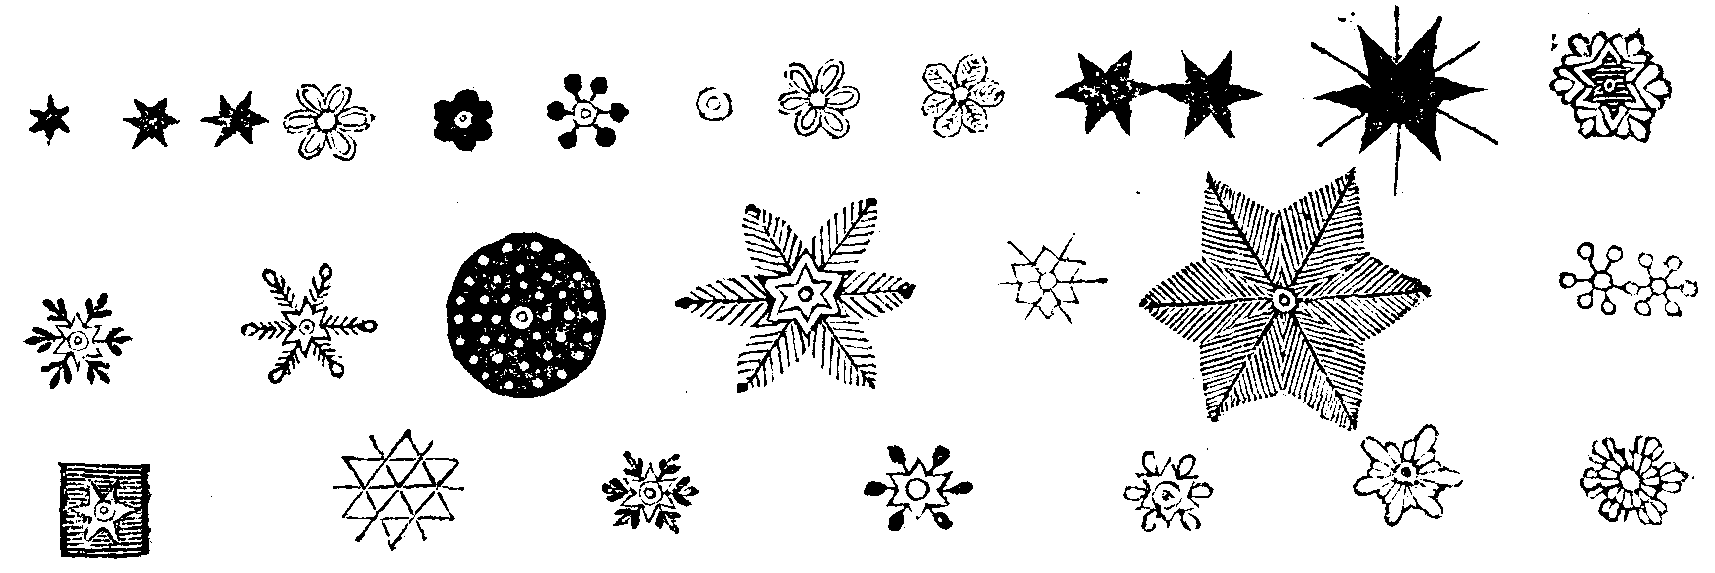 FLAKES OF SNOW MAGNIFIED.